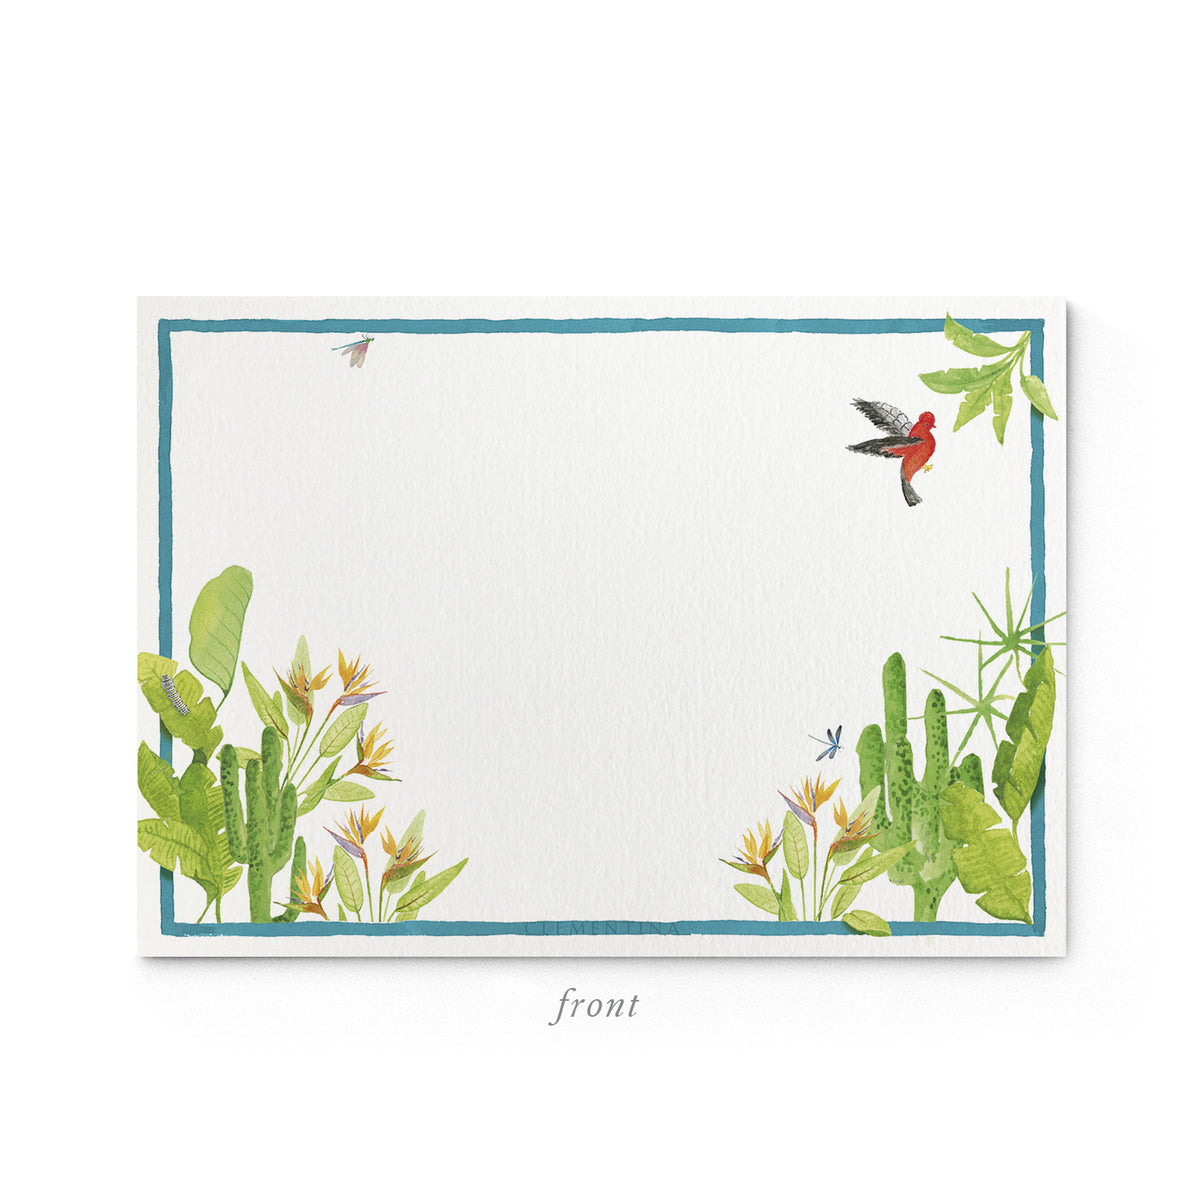 Tropical Escape Stationery Cards, Personalized Set of 50